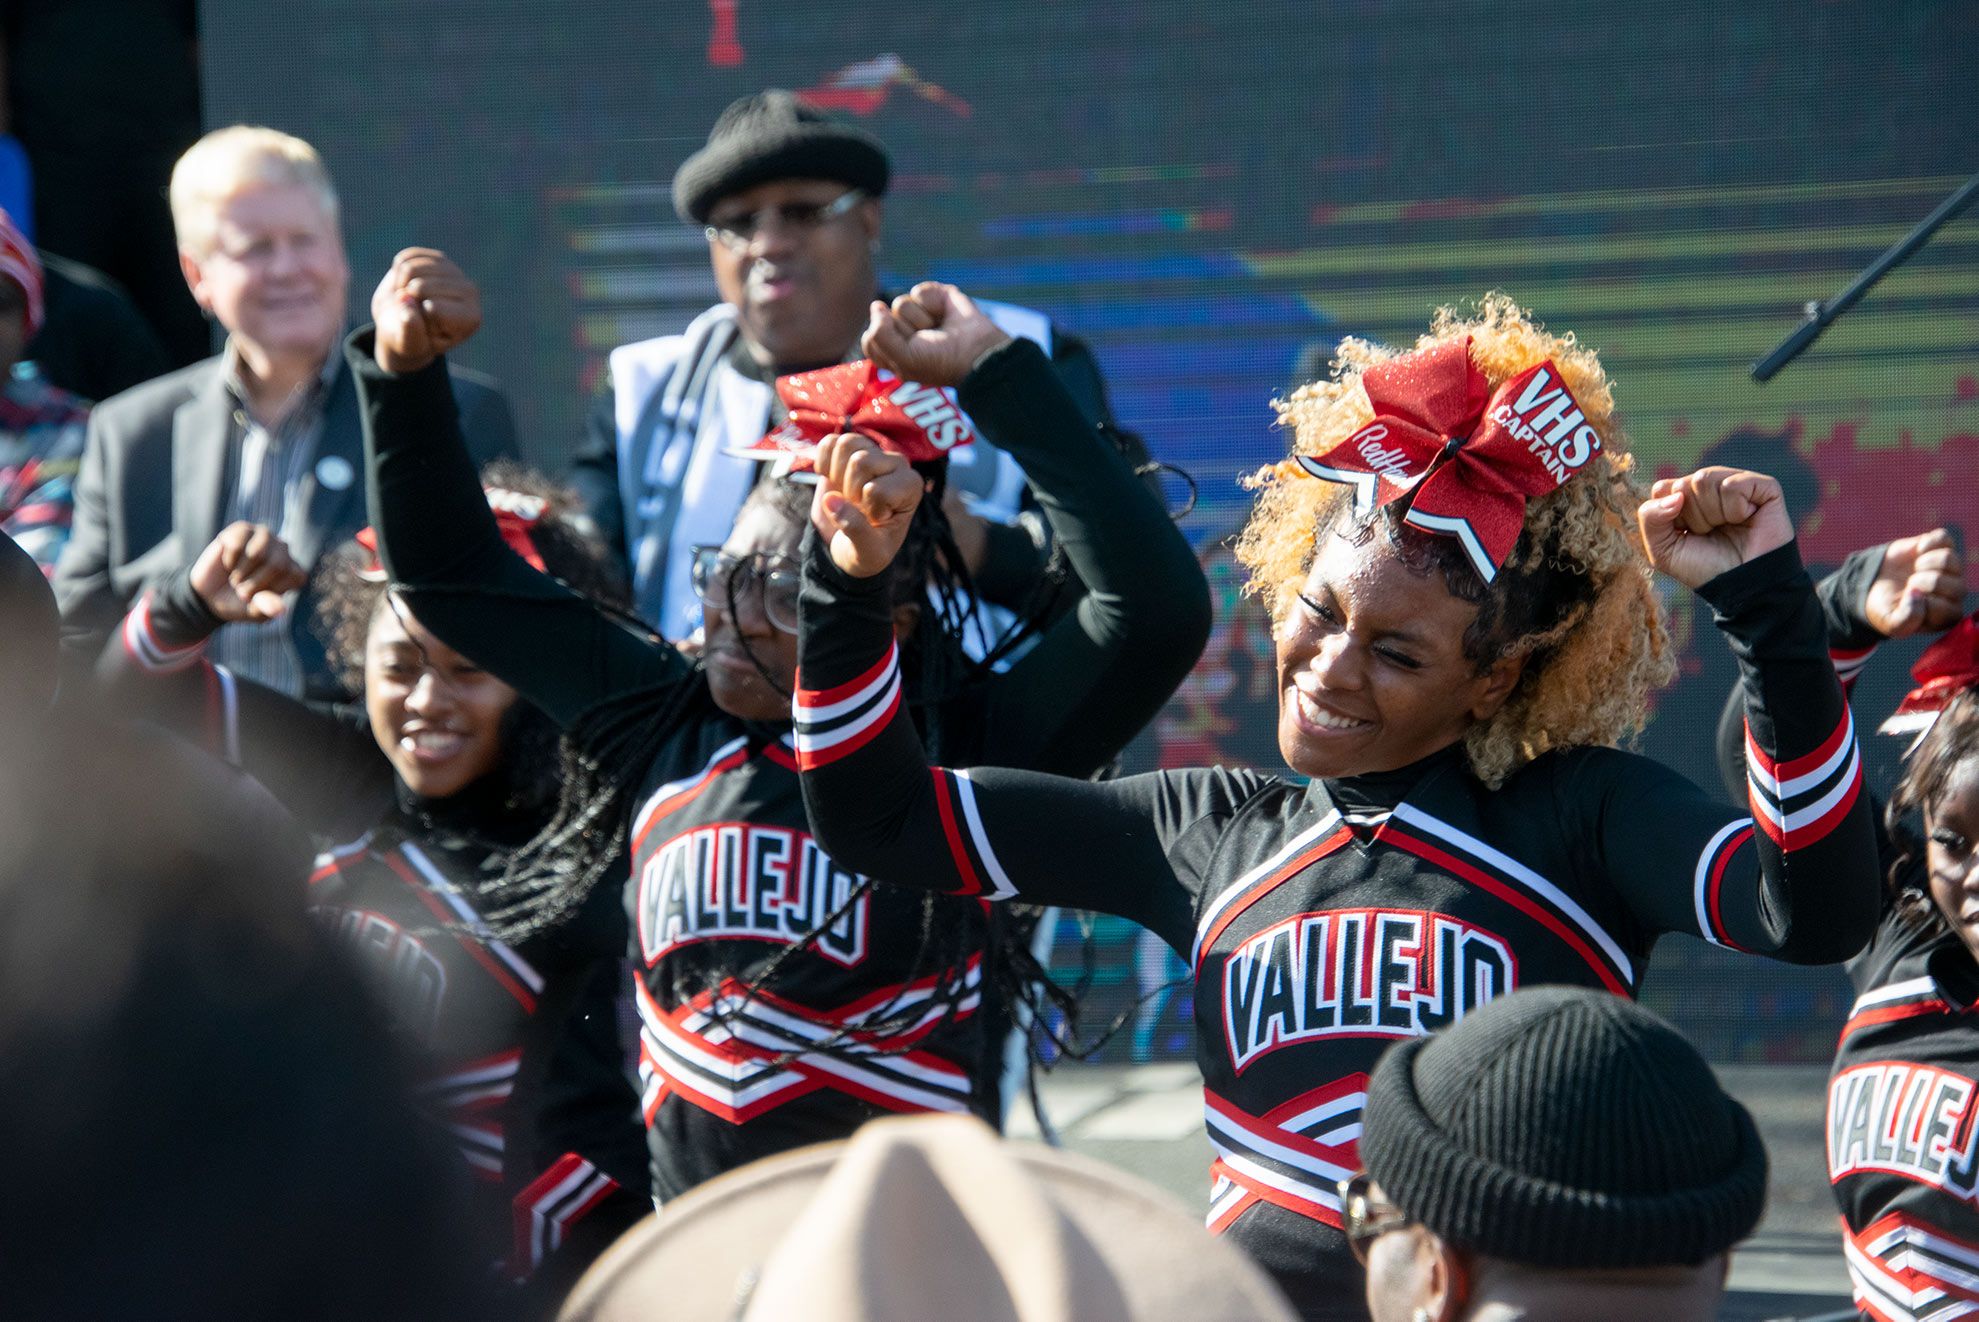 Vallejo Mayor Robert McConnell and rapper E-40 during a presentation by the Vallejo High School cheerleading squad. 